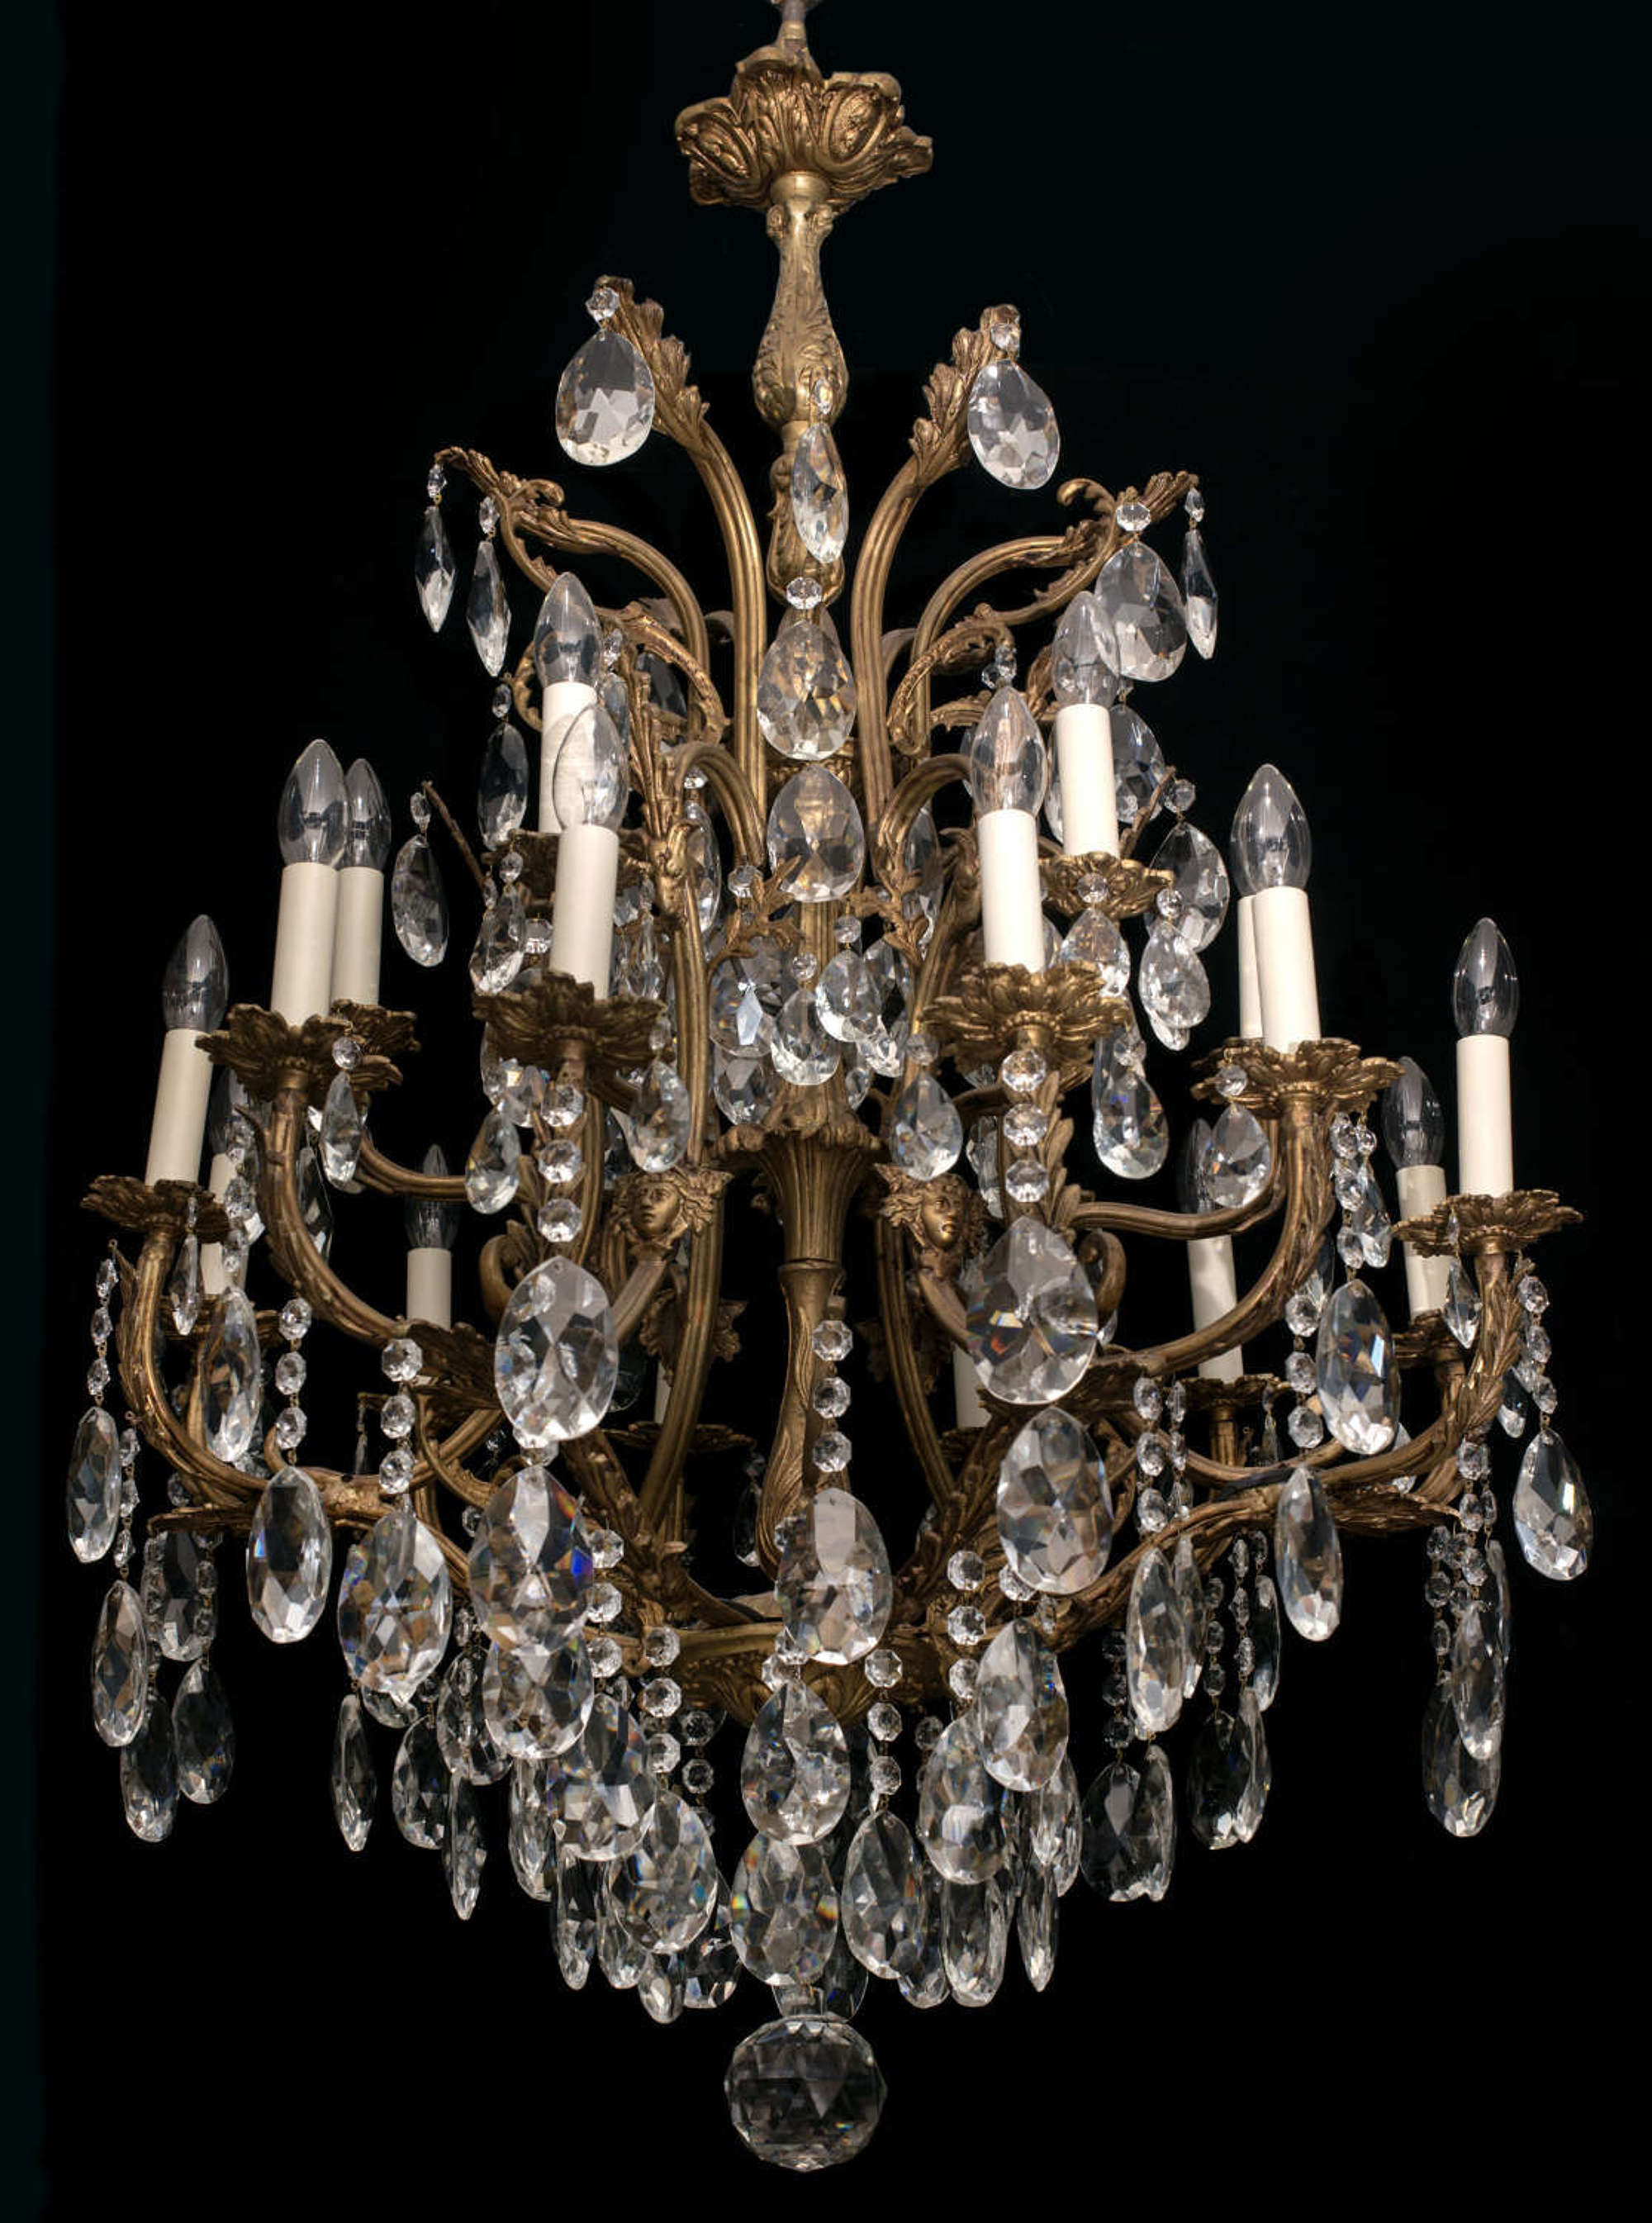 Very Large 18 light Italian Antique Chandelier with ladies faces